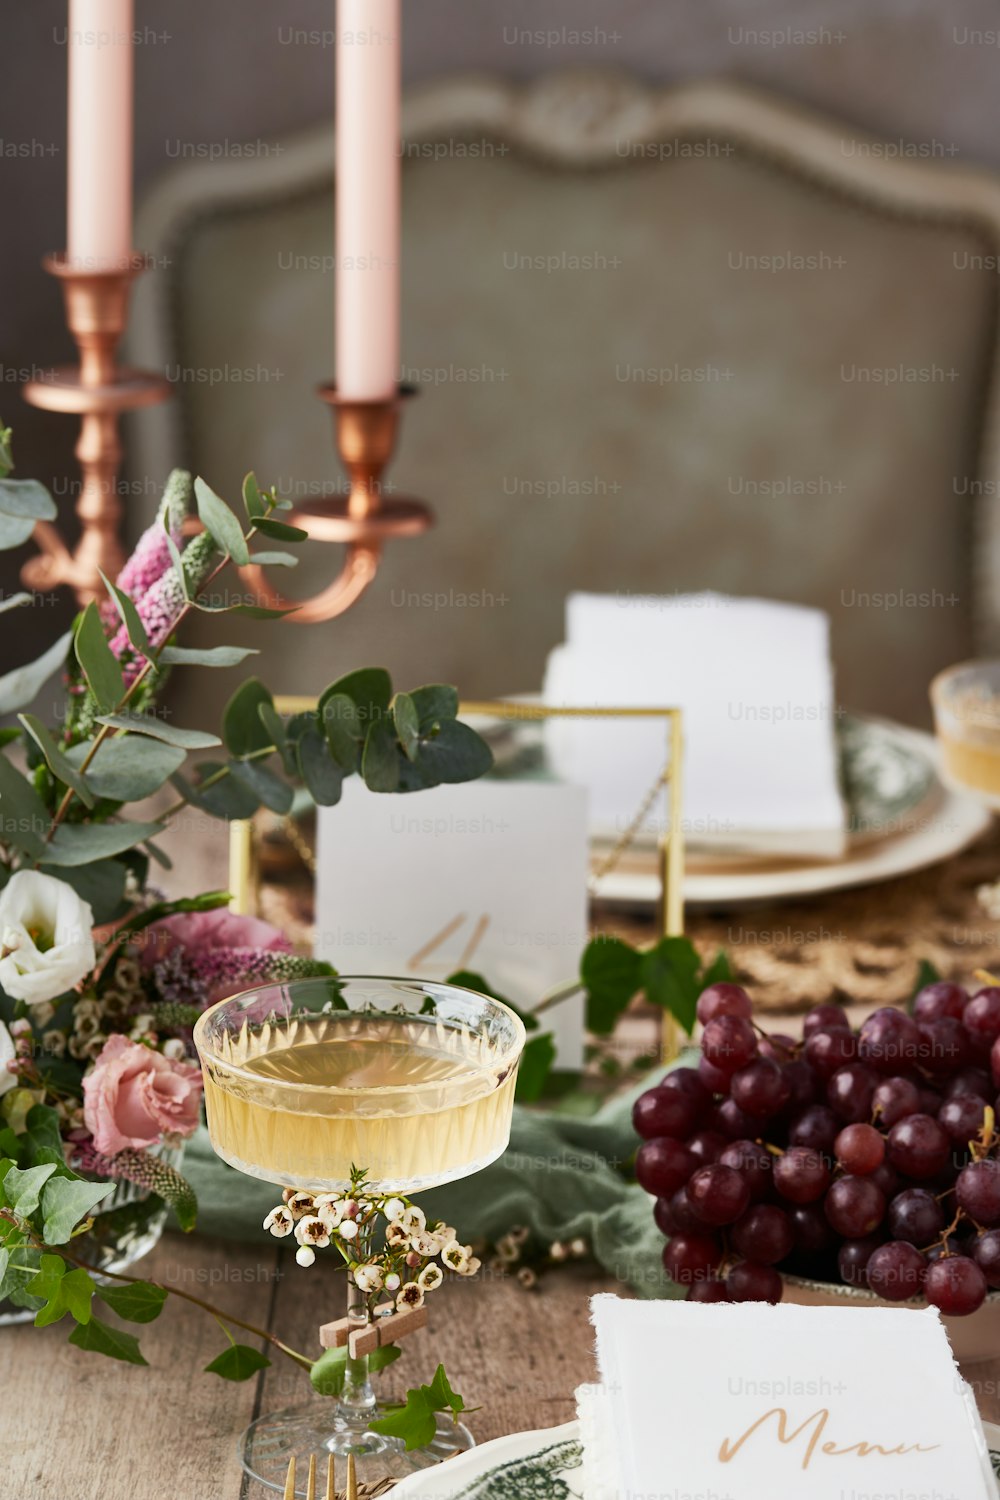 a table with a glass of wine and a place setting